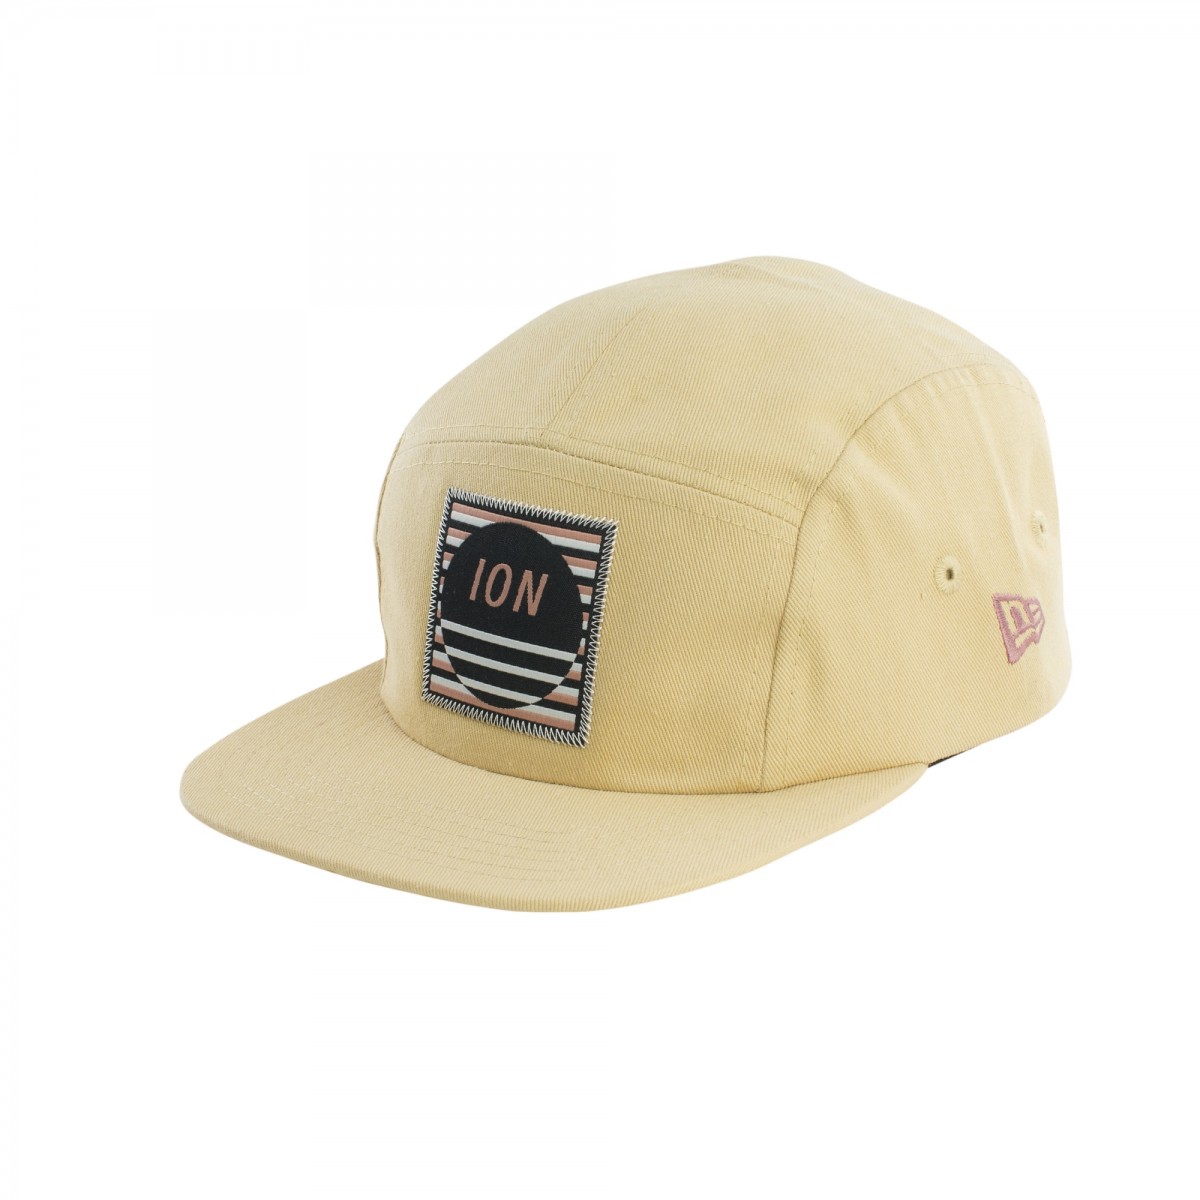 ION strap back cap dirty sand